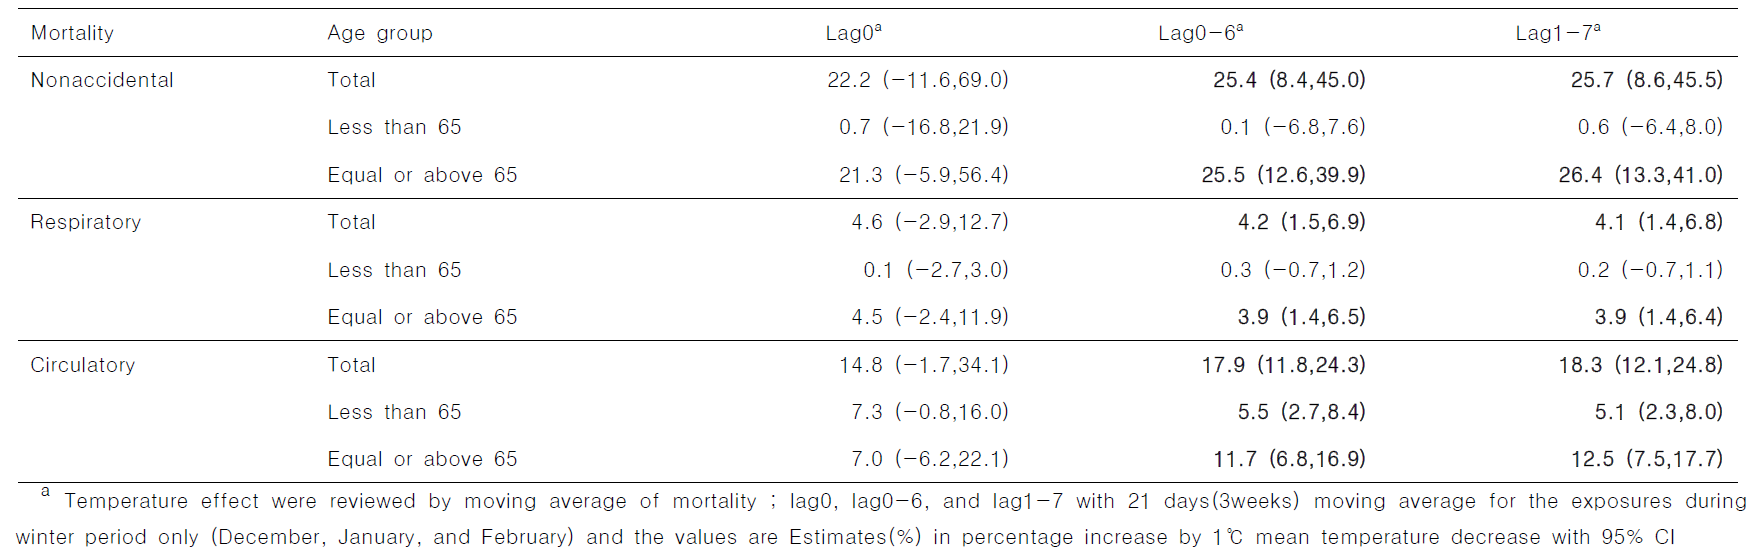 Percentage increase in cause-specific mortality risk for cold temperature during Winter